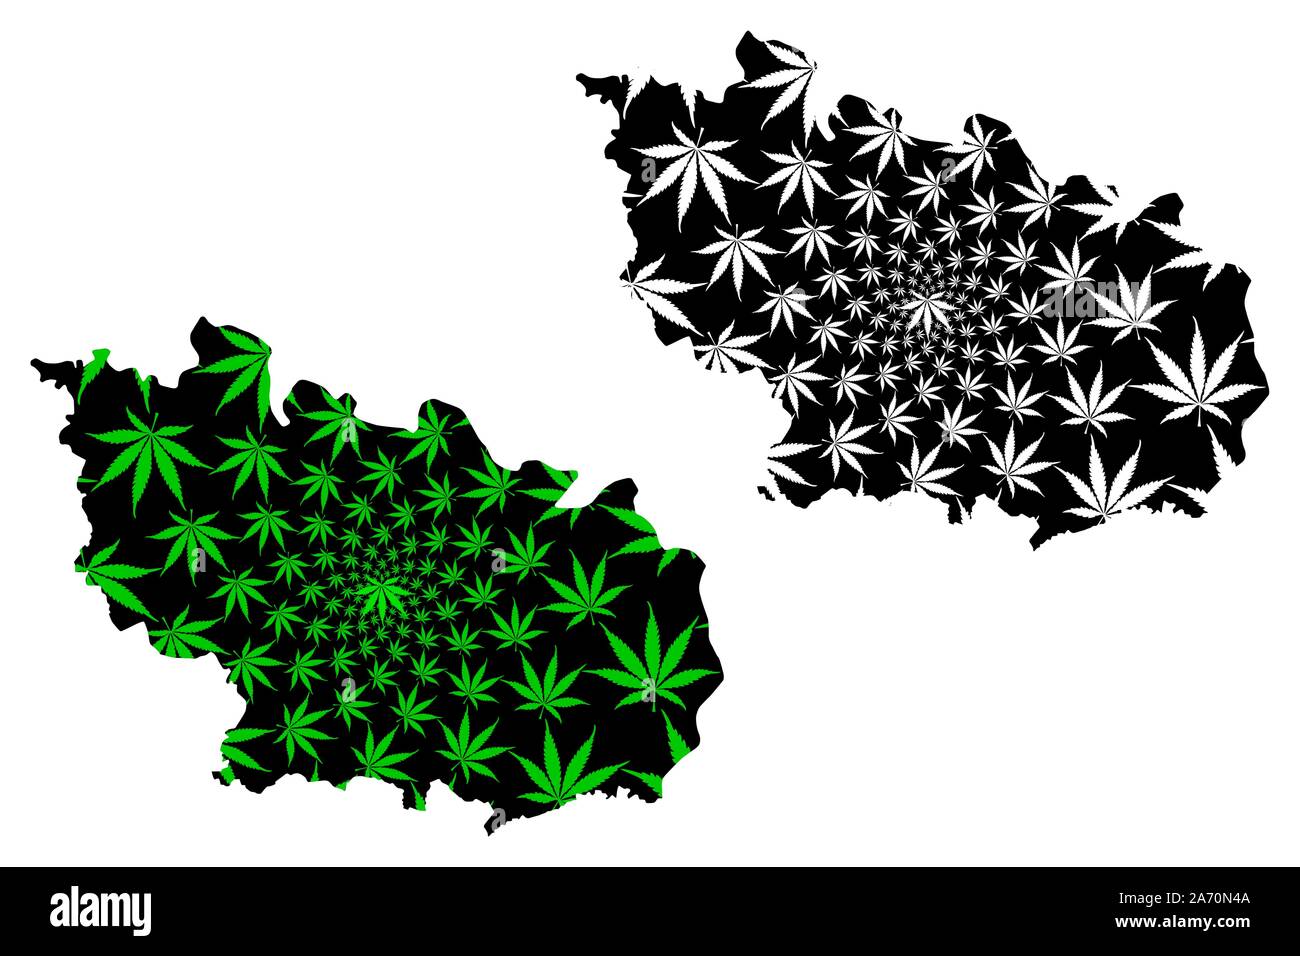 Bac Ninh Province (Socialist Republic of Vietnam, Subdivisions of Vietnam) map is designed cannabis leaf green and black, Tinh Bac Ninh map made of ma Stock Vector